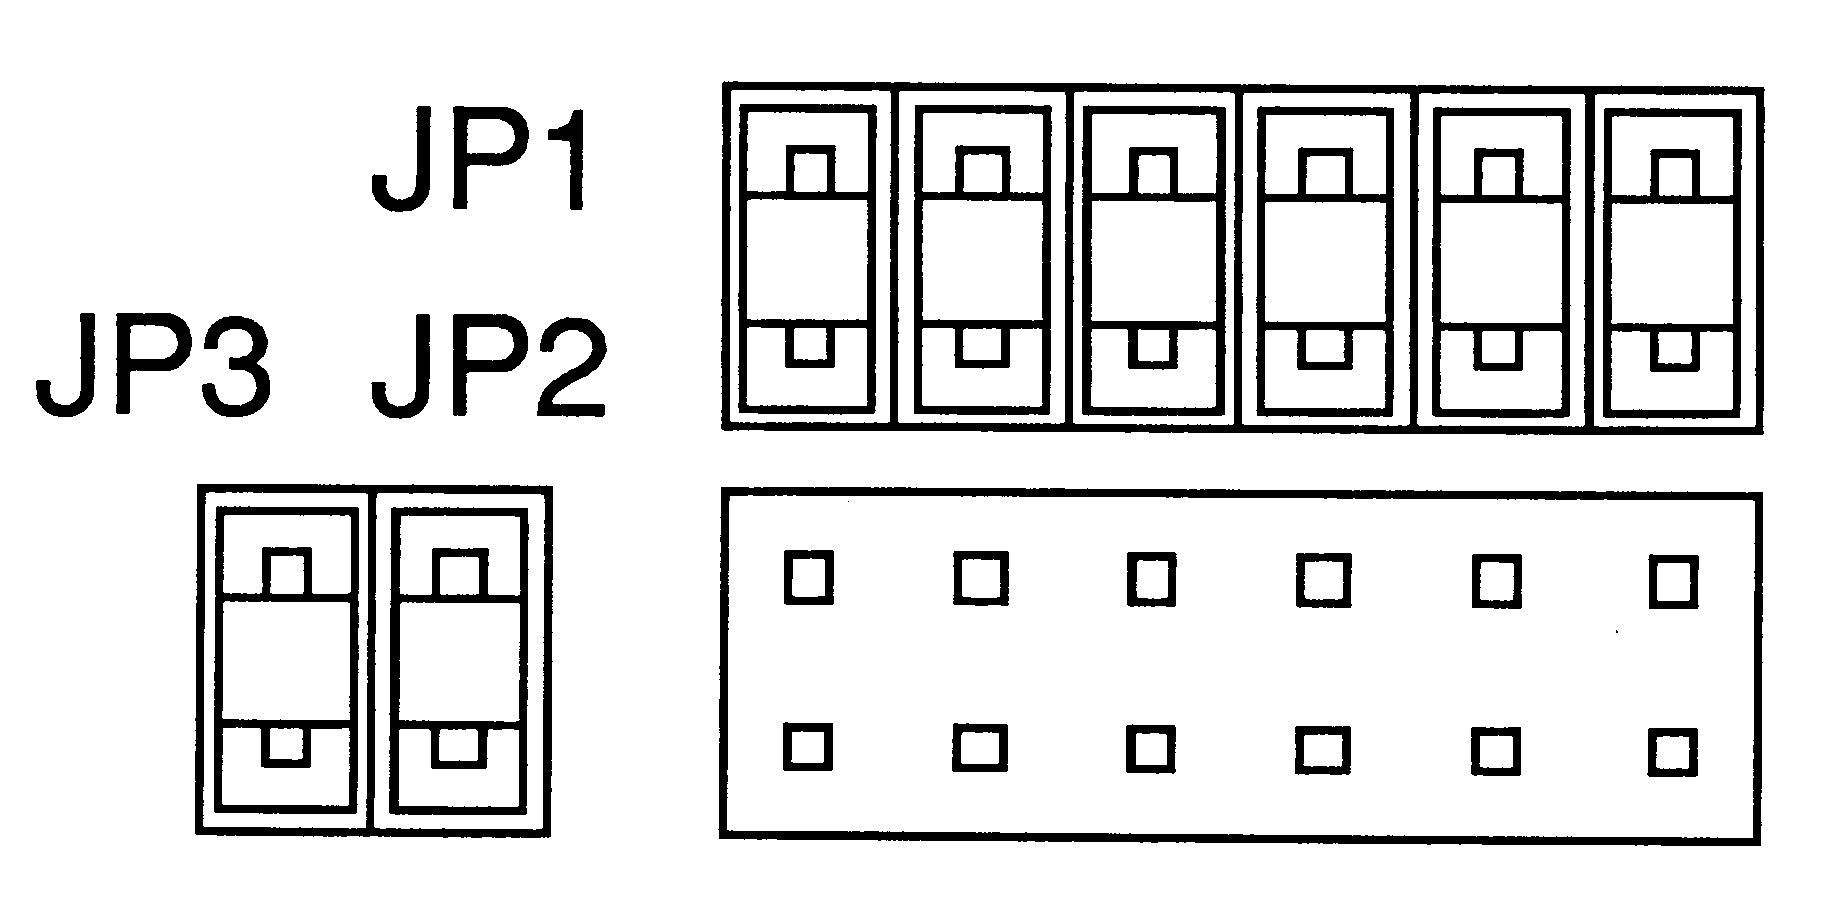 Diagram showing the fitting of jumpers to
the jumper pin arrays, jumpers shown fitted to JP1 and JP3